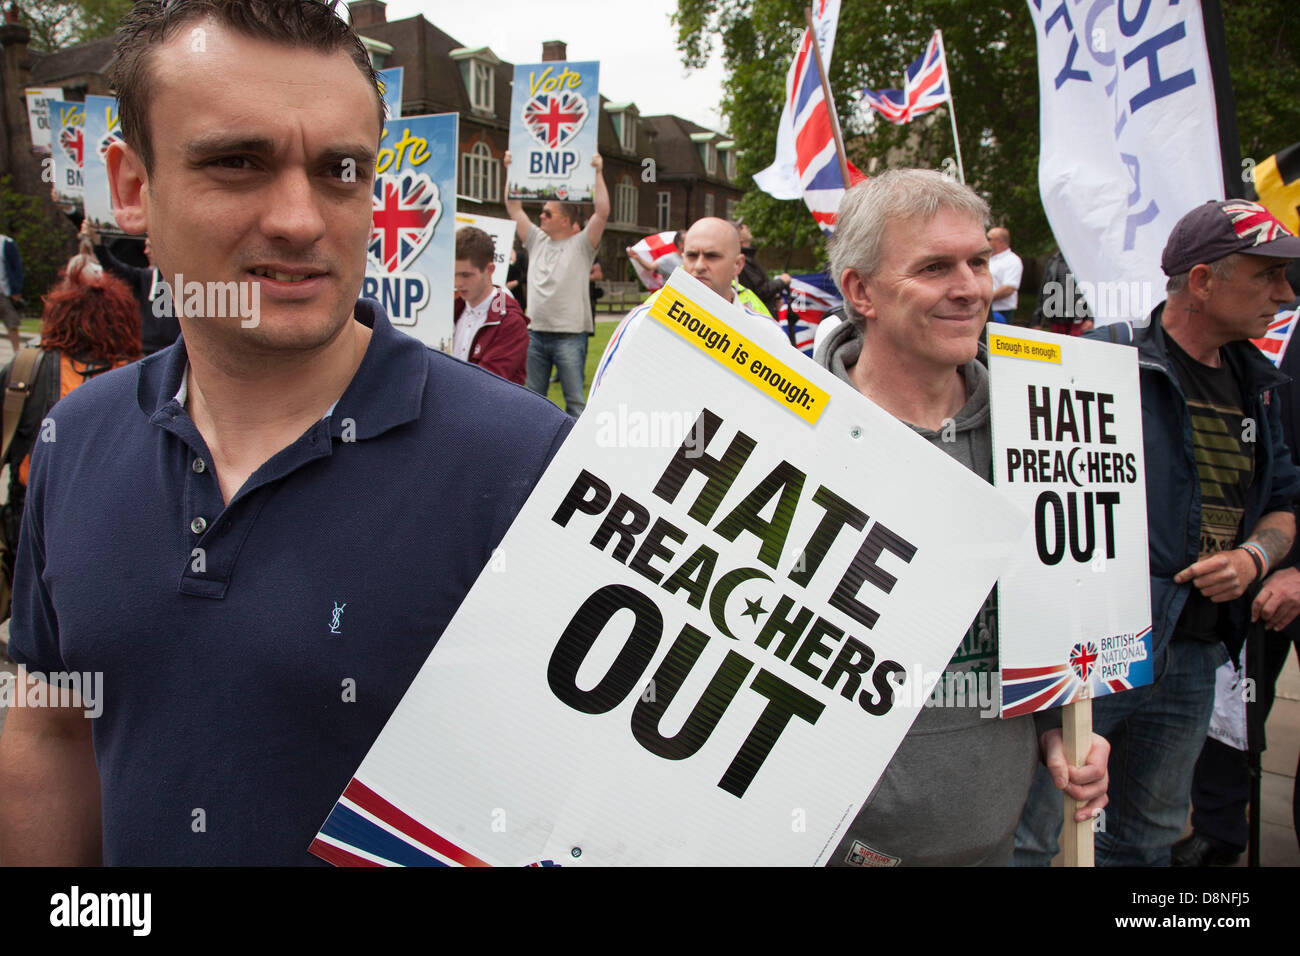 British National Party BNP gather to protest against hate preachers. They were prevented from marching by protesters. London. Stock Photo